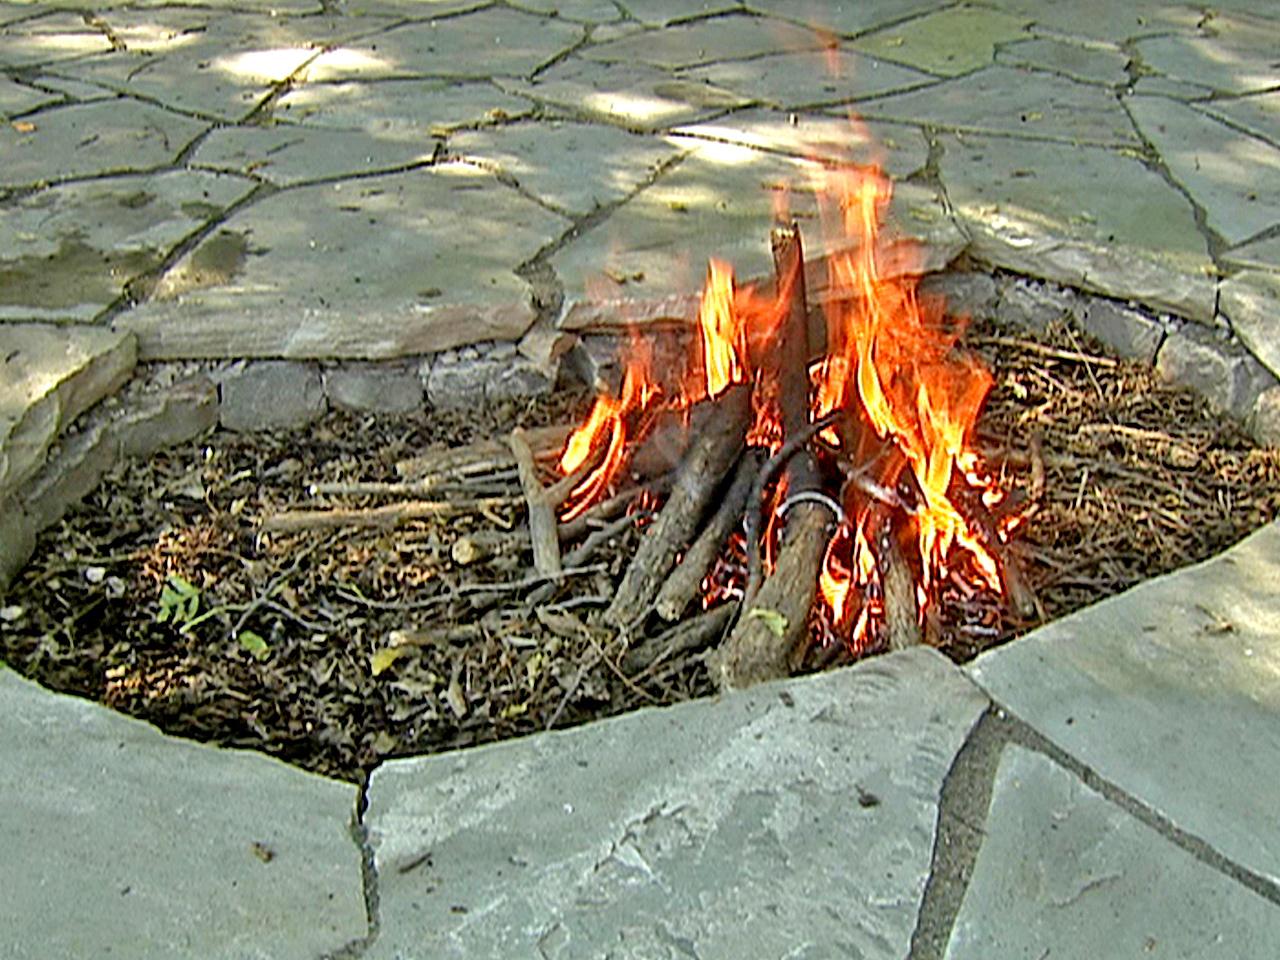 Outdoor Fire Pits And Pit Safety, Are Propane Fire Pits Dangerous